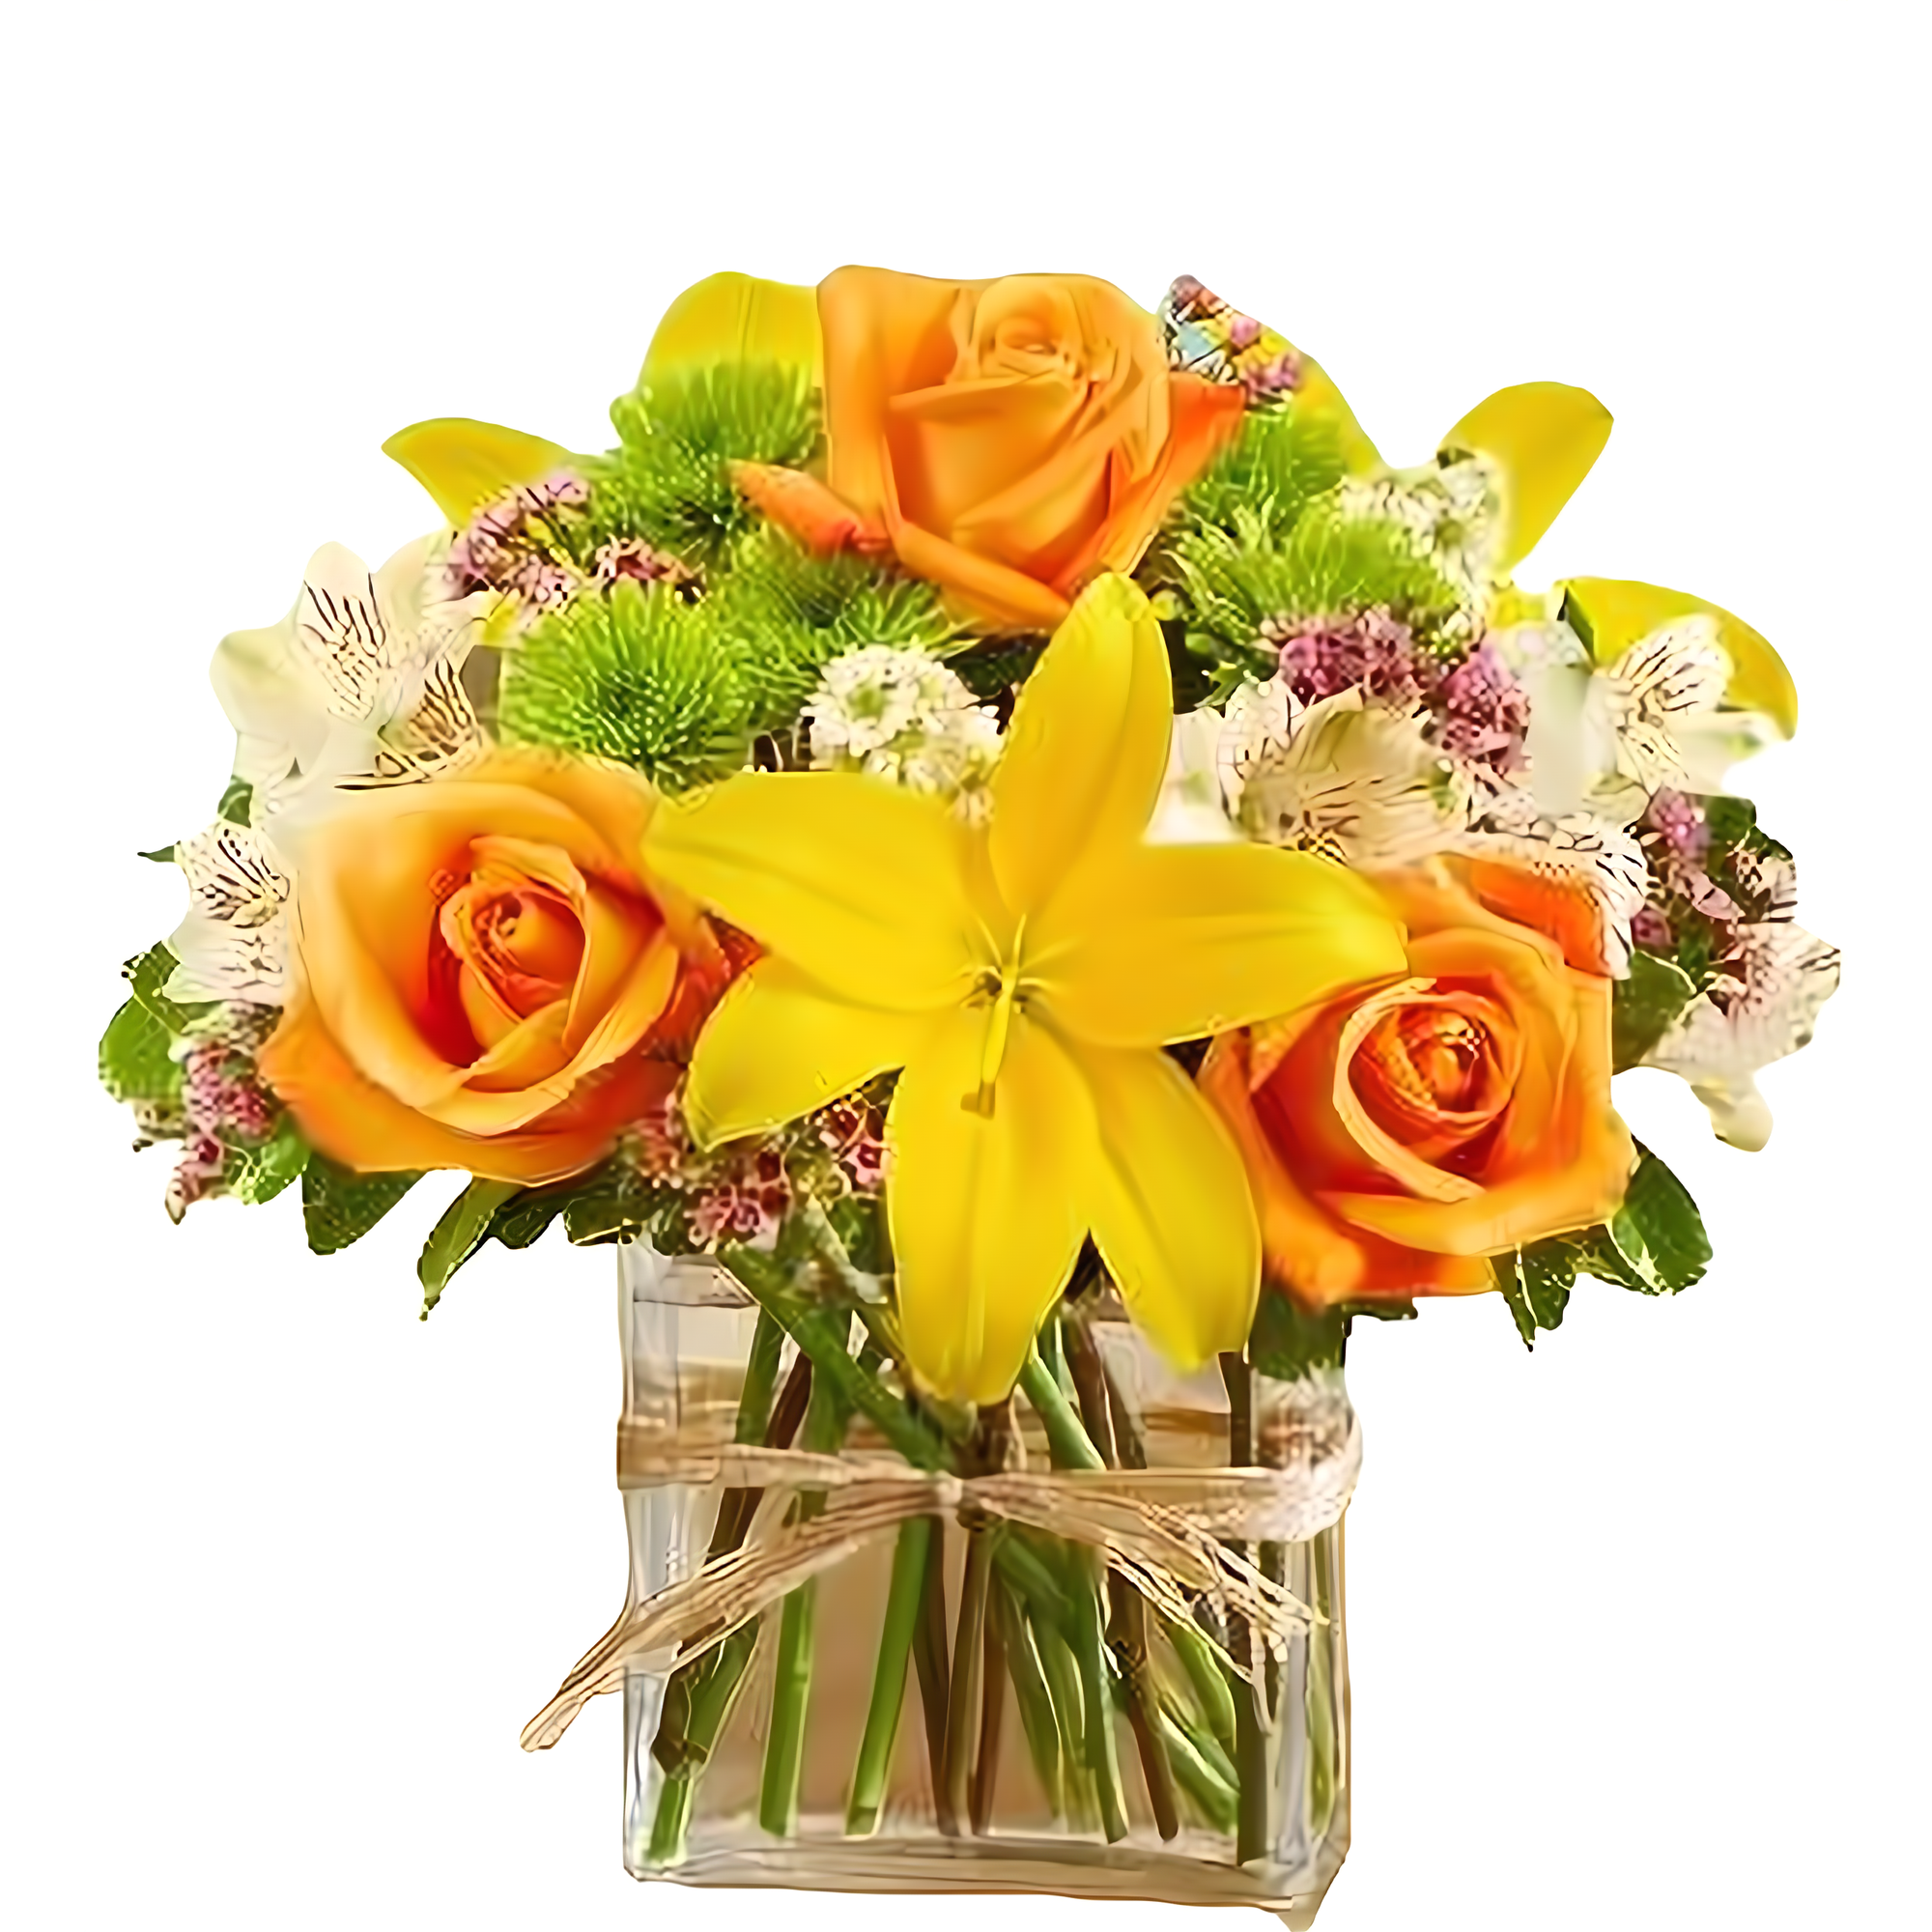 Manhattan Flower Delivery - Fields of the World in Rectangle - Products > Corporate Gifts